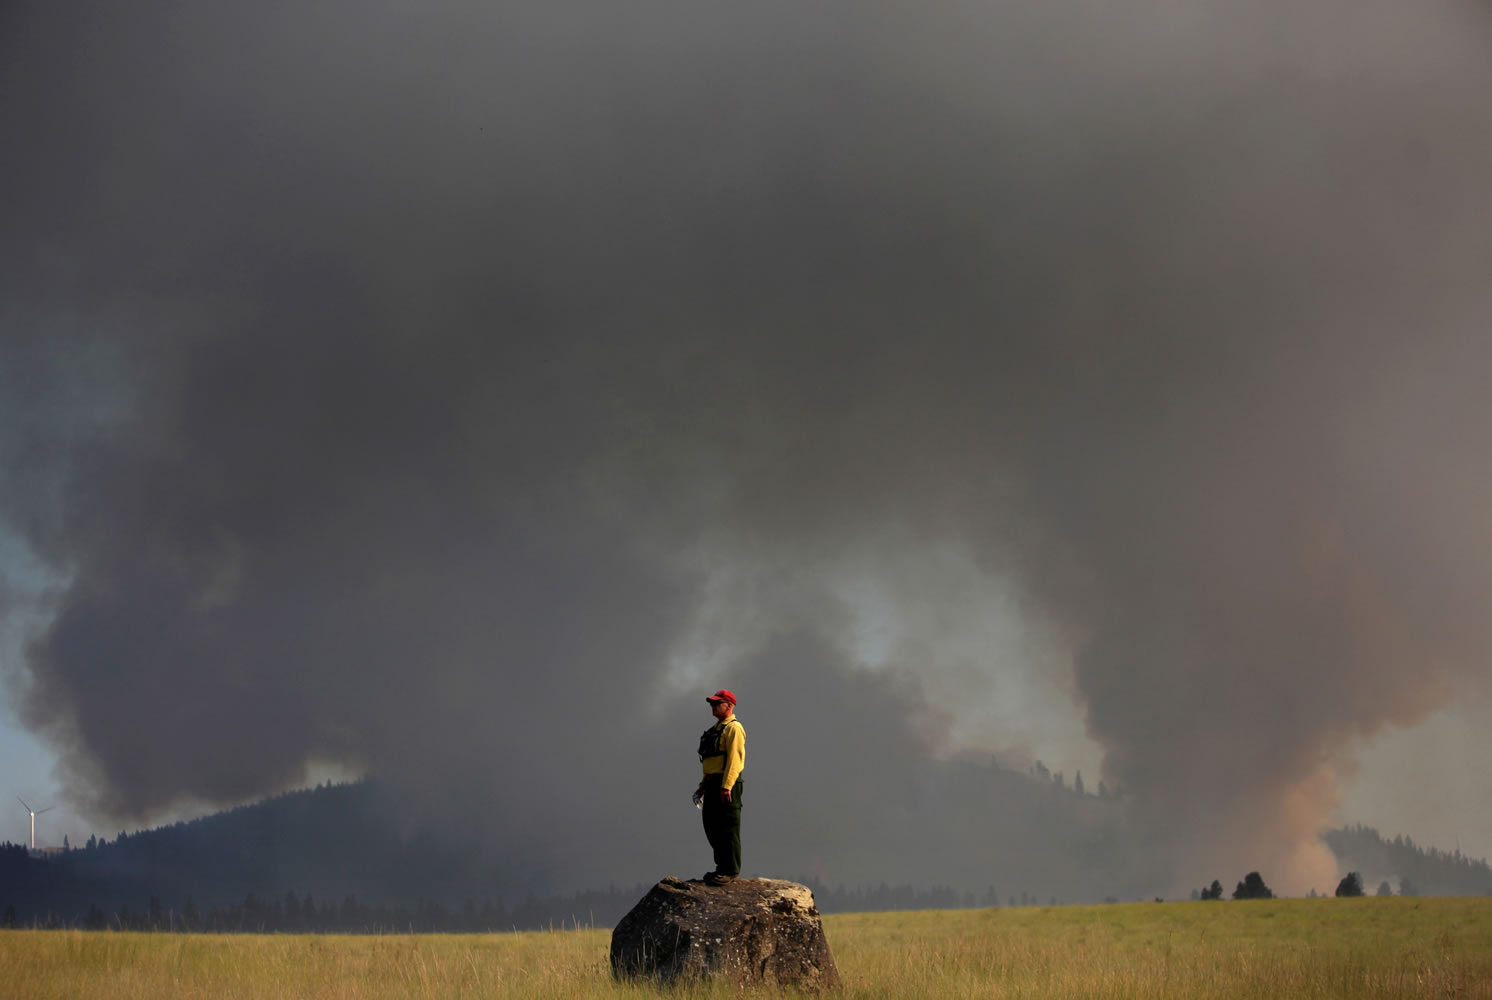 Marcus Johns with the Department of Natural Resources watches as the Taylor Bridge Fire burns on the south side of Highway 970 near Swauk Prairie Road on Wednesday near Cle Elum.